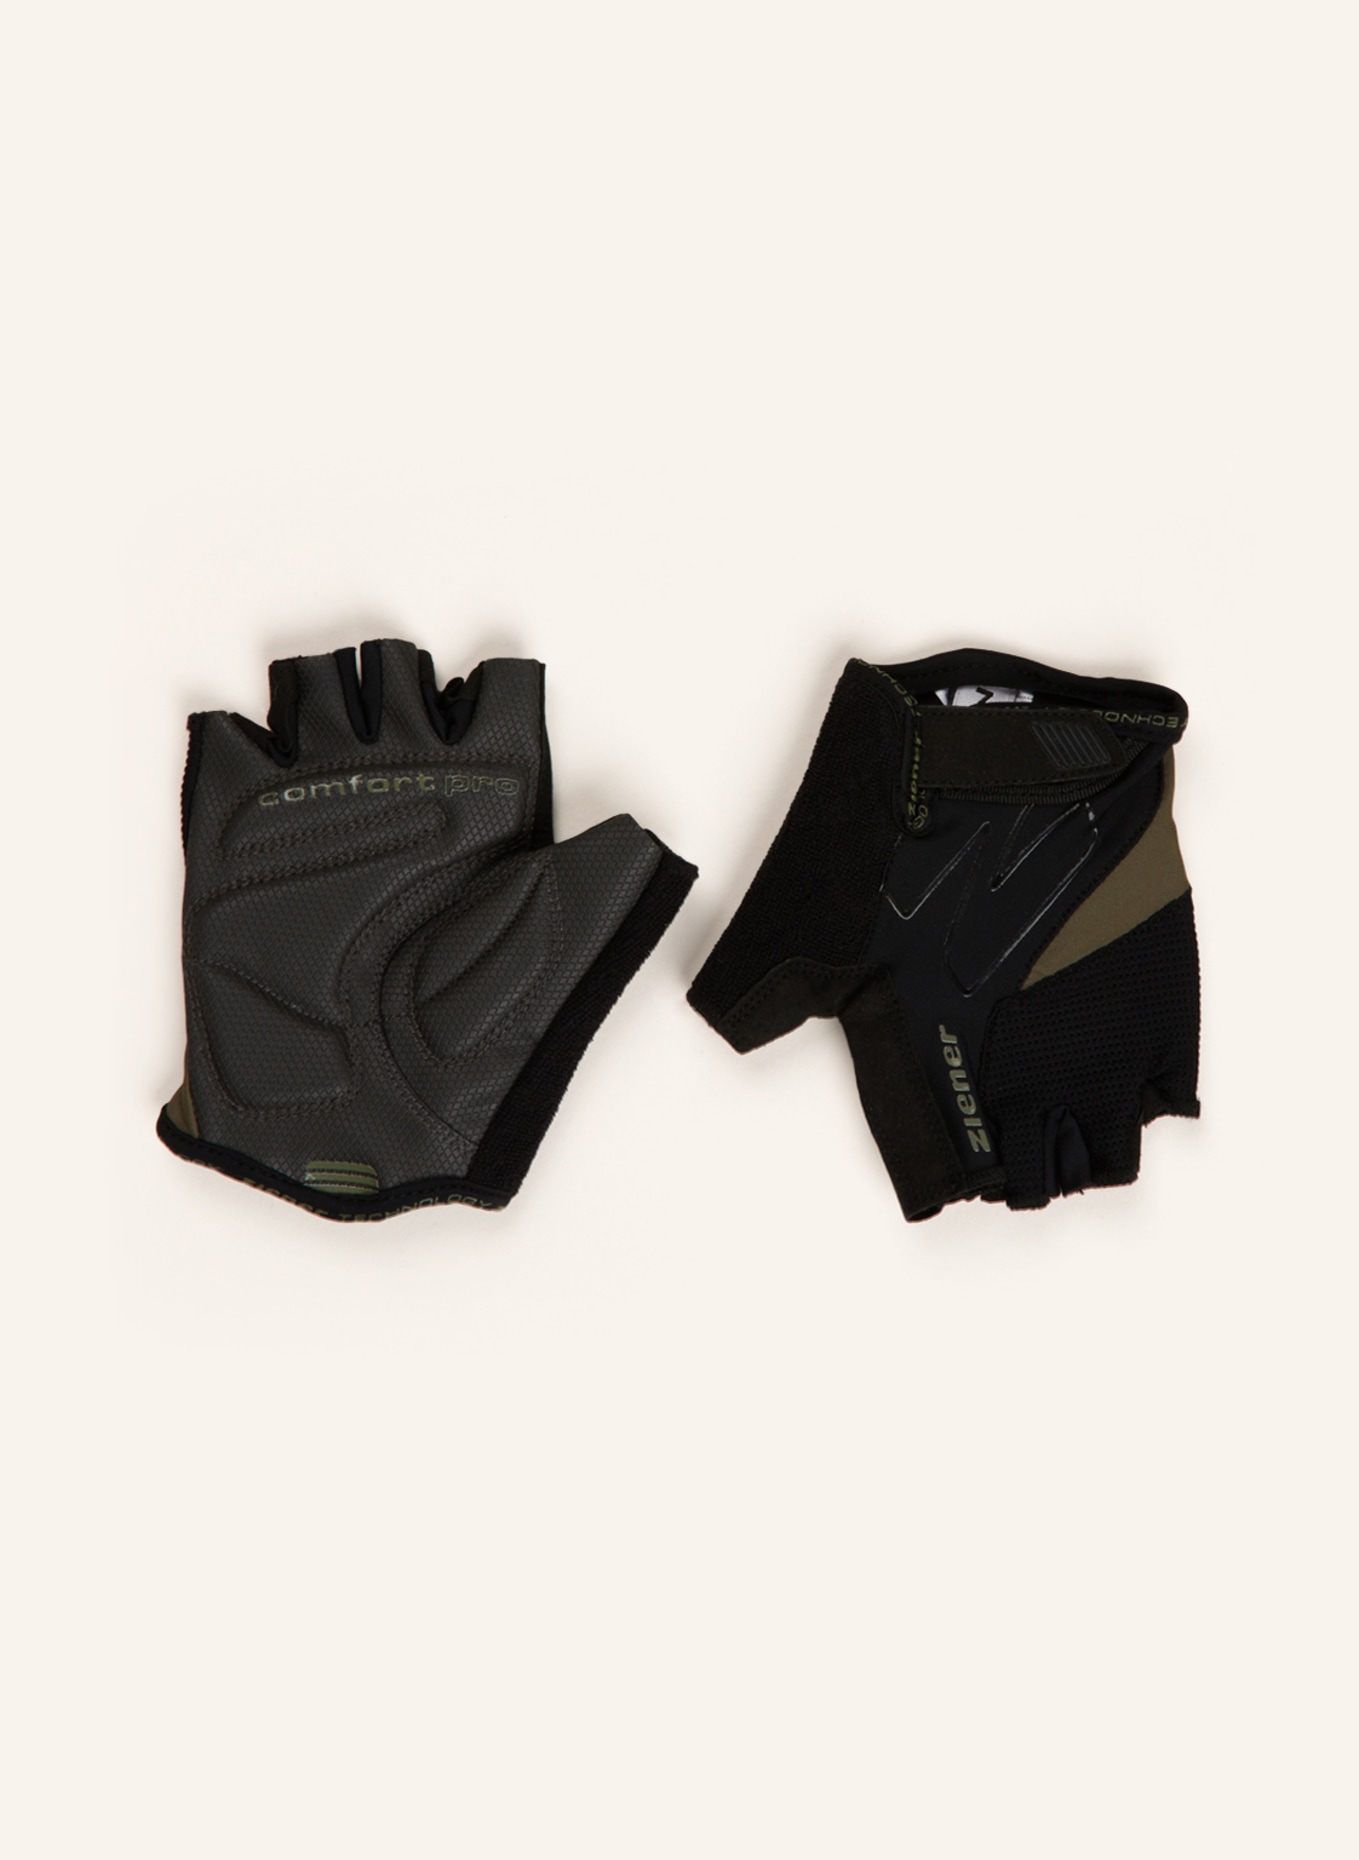 black/ gloves CRAVE in khaki Cycling ziener